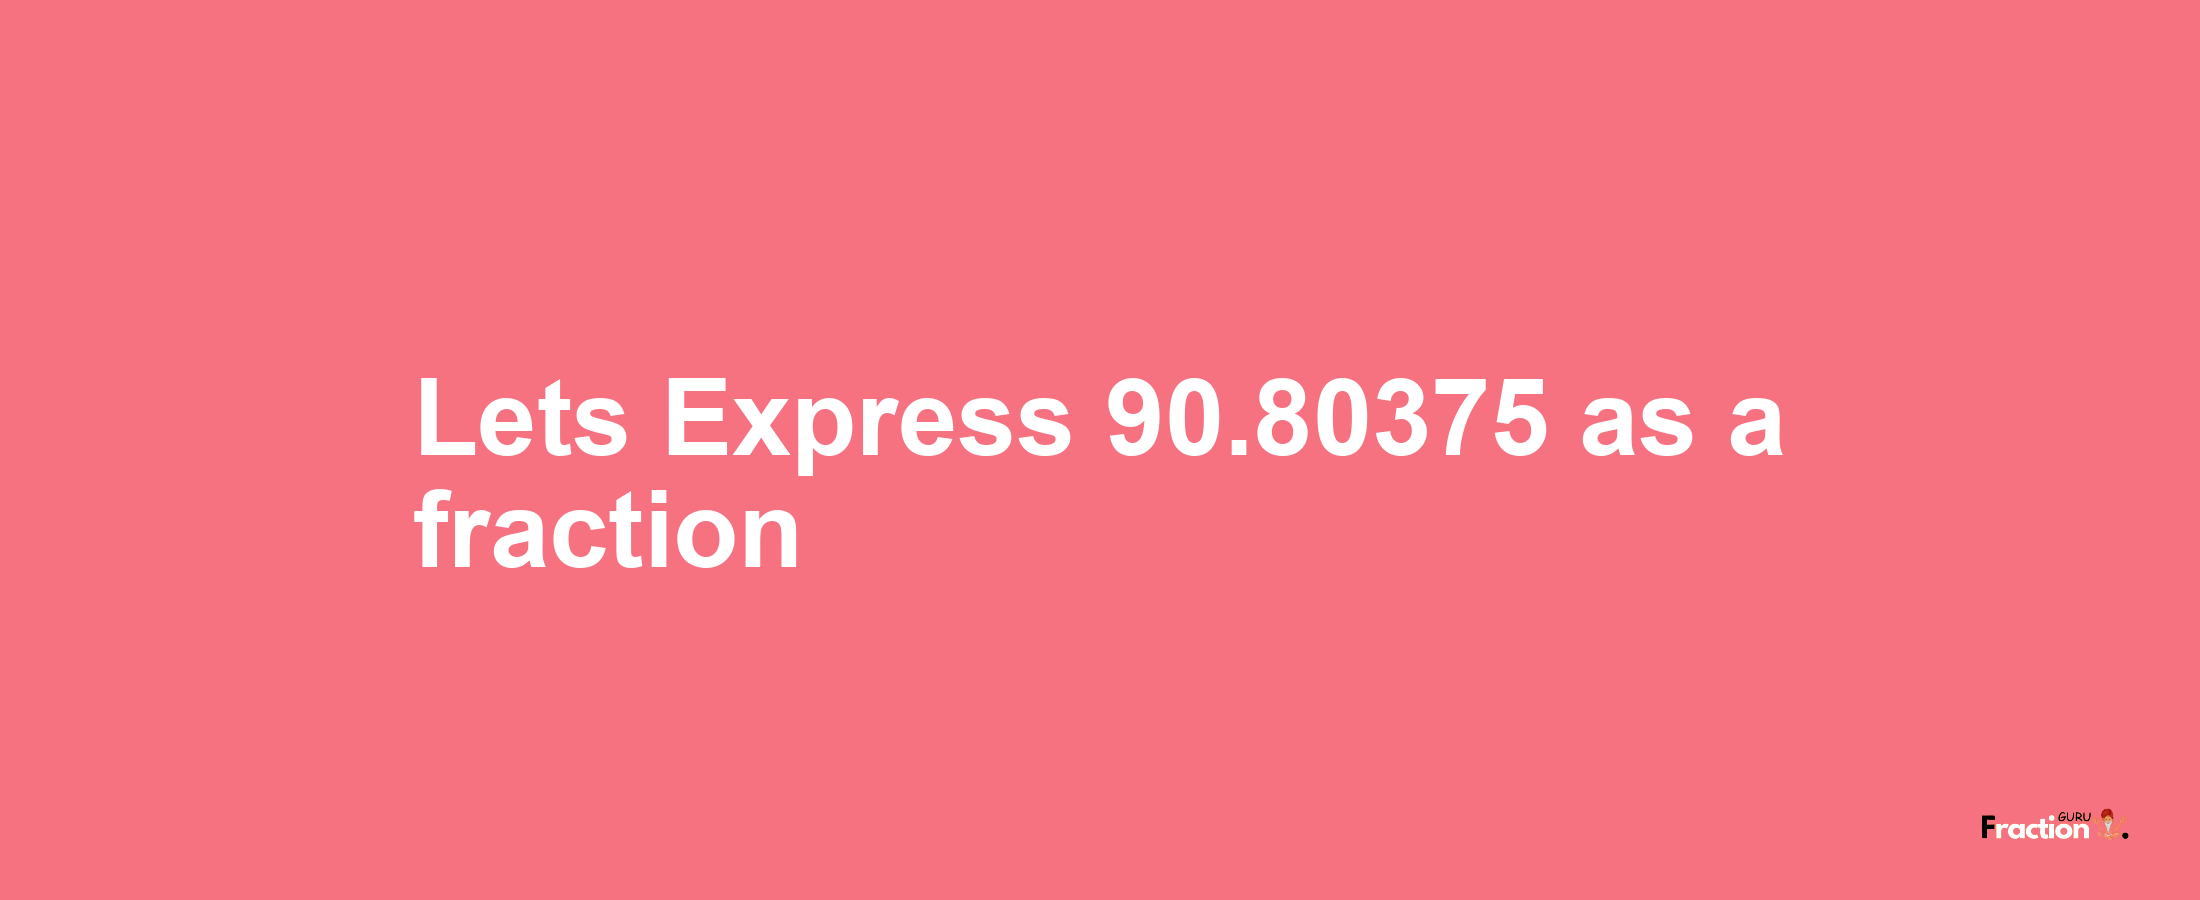 Lets Express 90.80375 as afraction